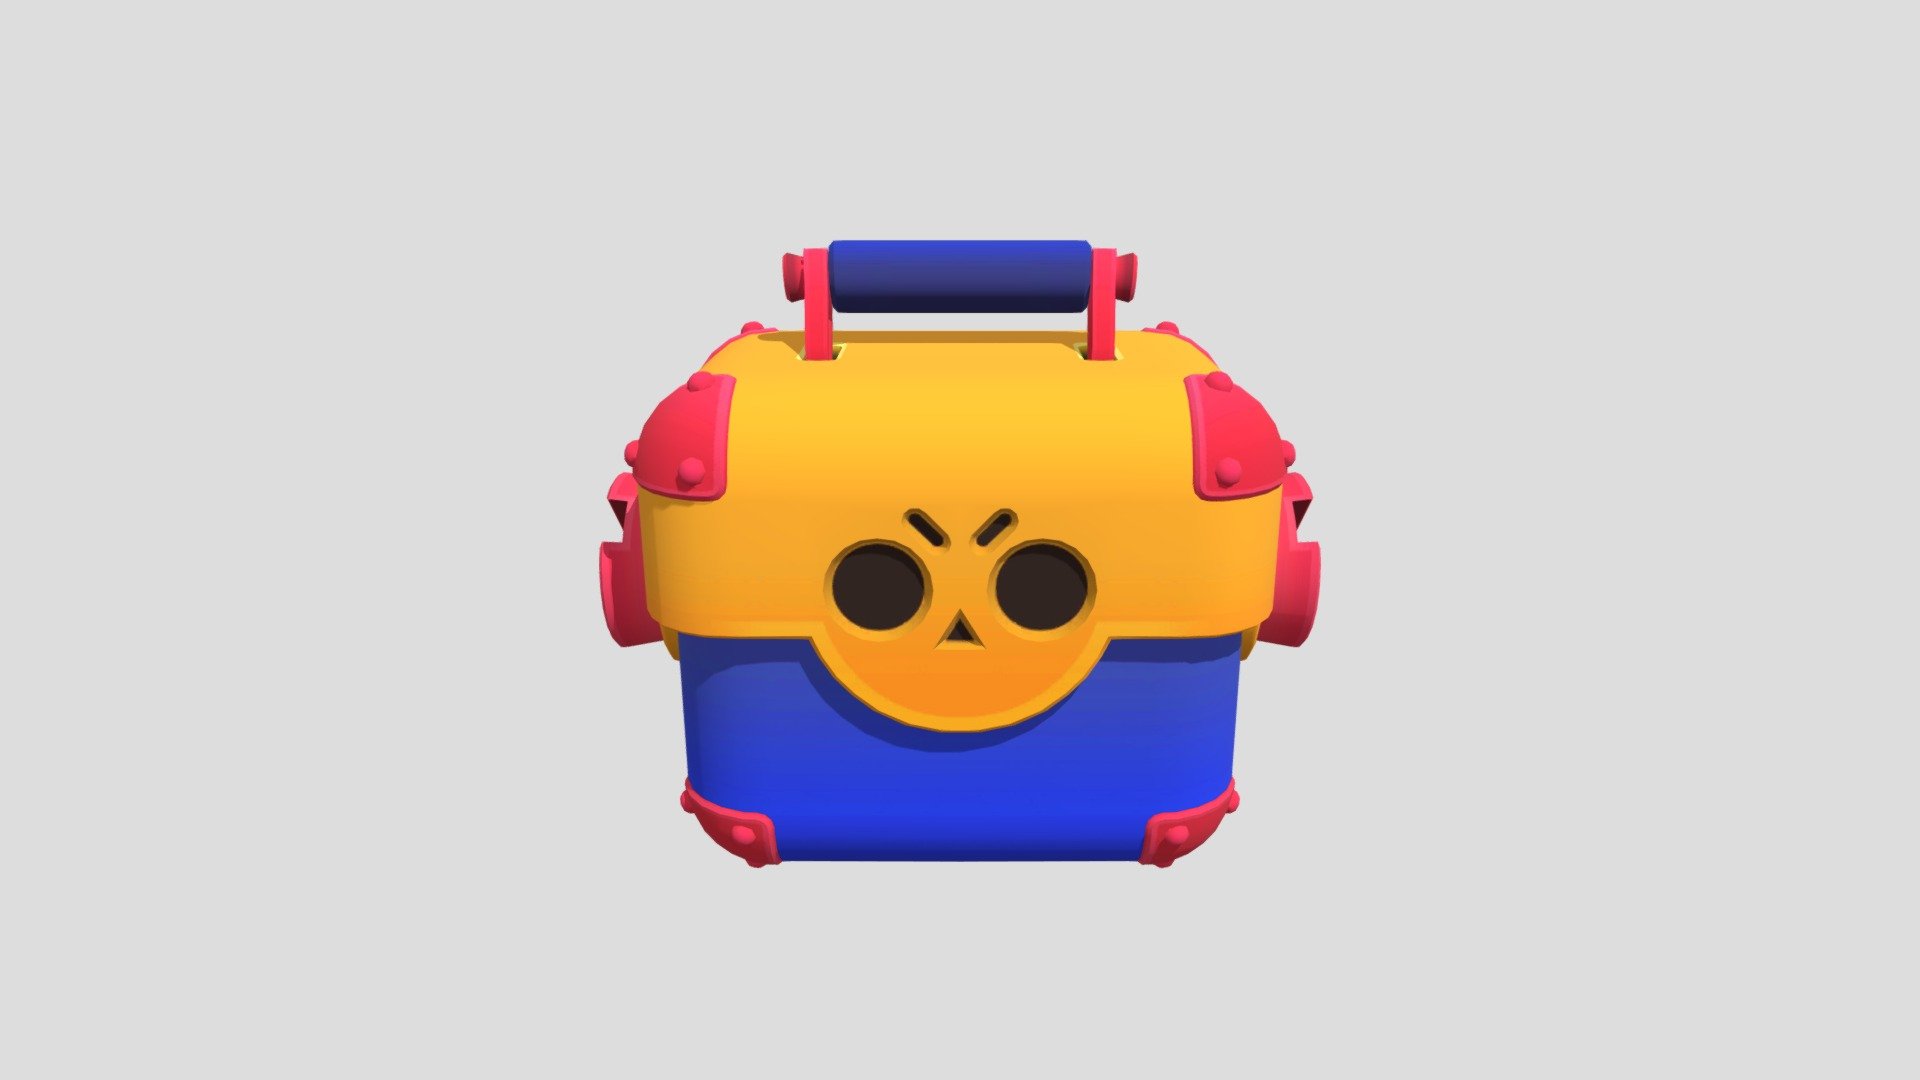 Brawl Boxes are your main source of Brawlers and power points to level them up in Brawl Stars. There are 3 sizes of Brawl Boxes; Brawl Box, Big Box, and Mega Box. The bigger the box, the more rewards and opportunity to unlock rare Brawlers. There are multiple ways to get these boxes, but the best way to get boxes is to just consistently play Brawl Stars 3d model